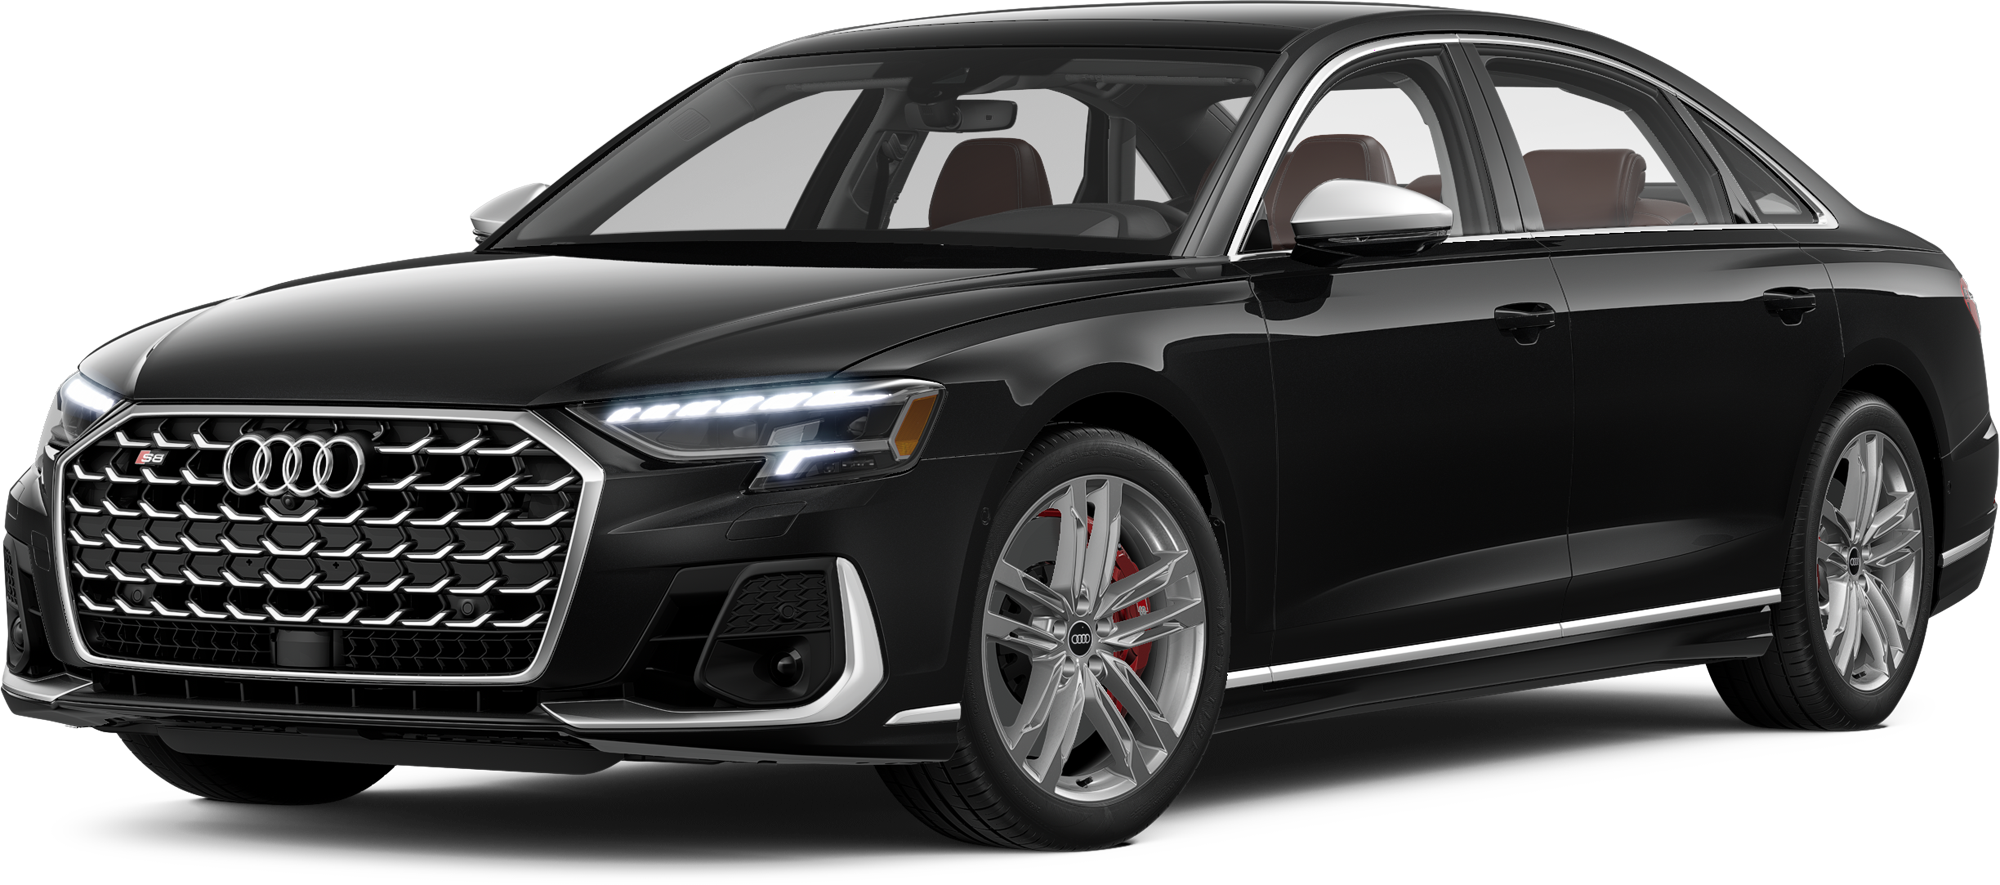 2023 Audi S8 Incentives, Specials & Offers in Benbrook TX